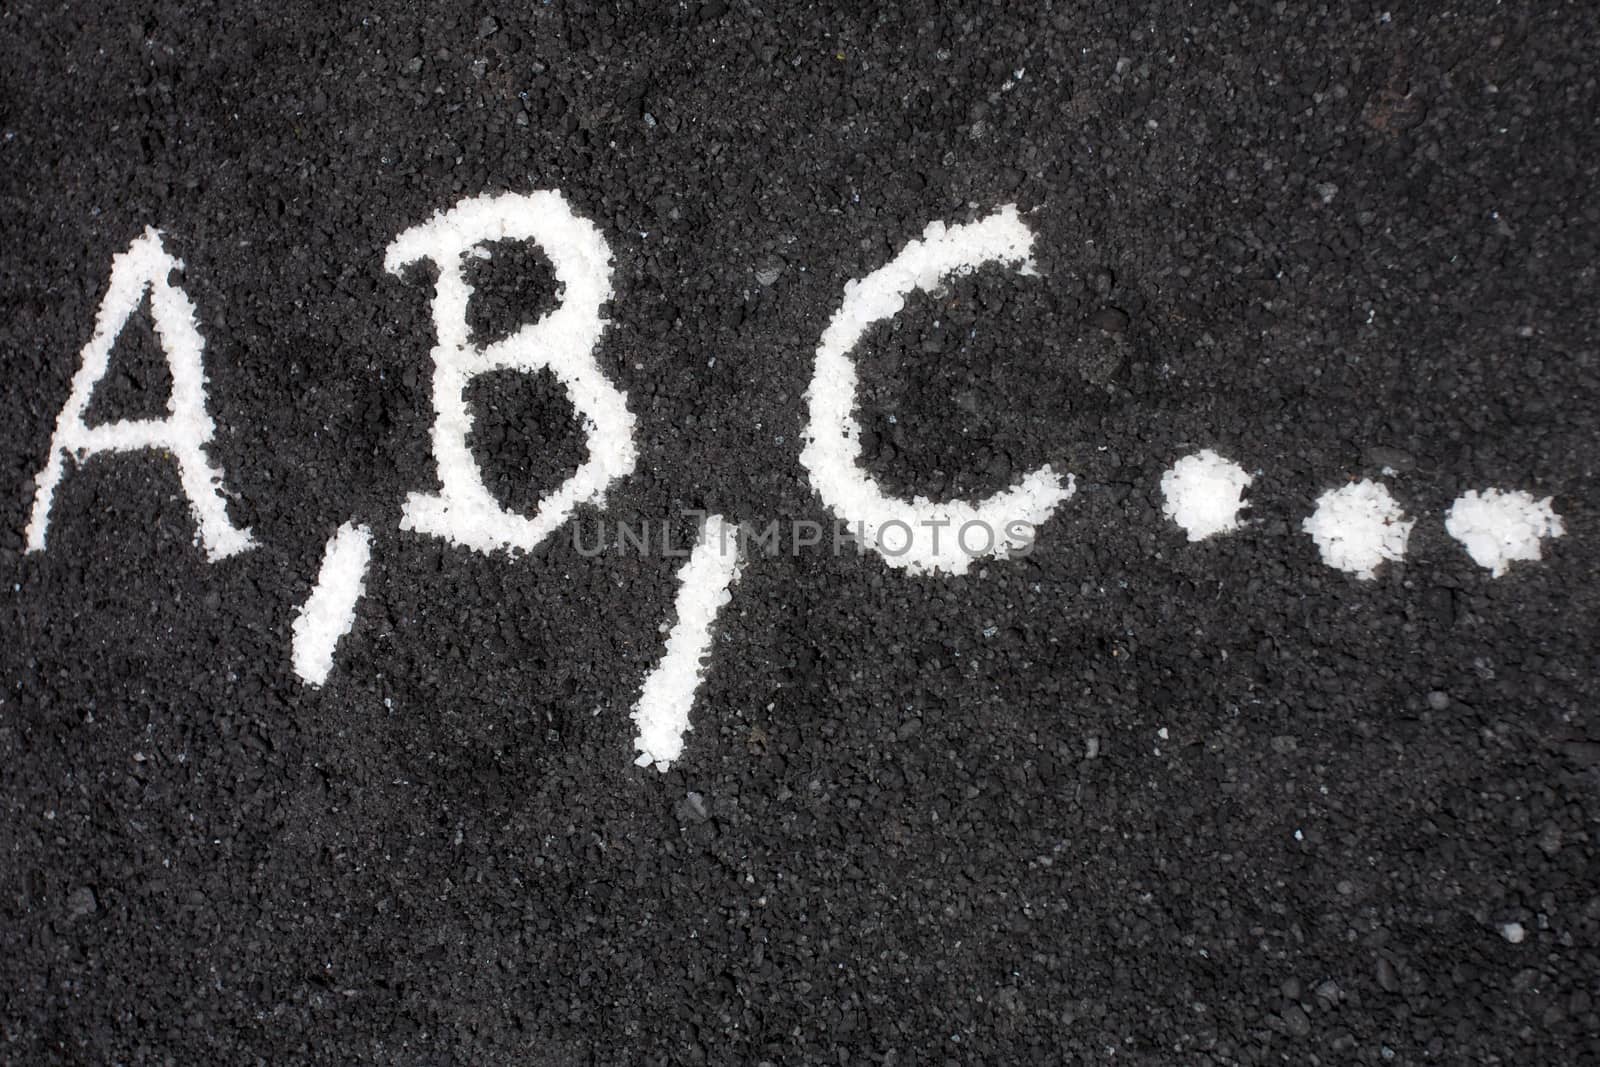 White letters a, b, c, written on the floor by watchtheworld